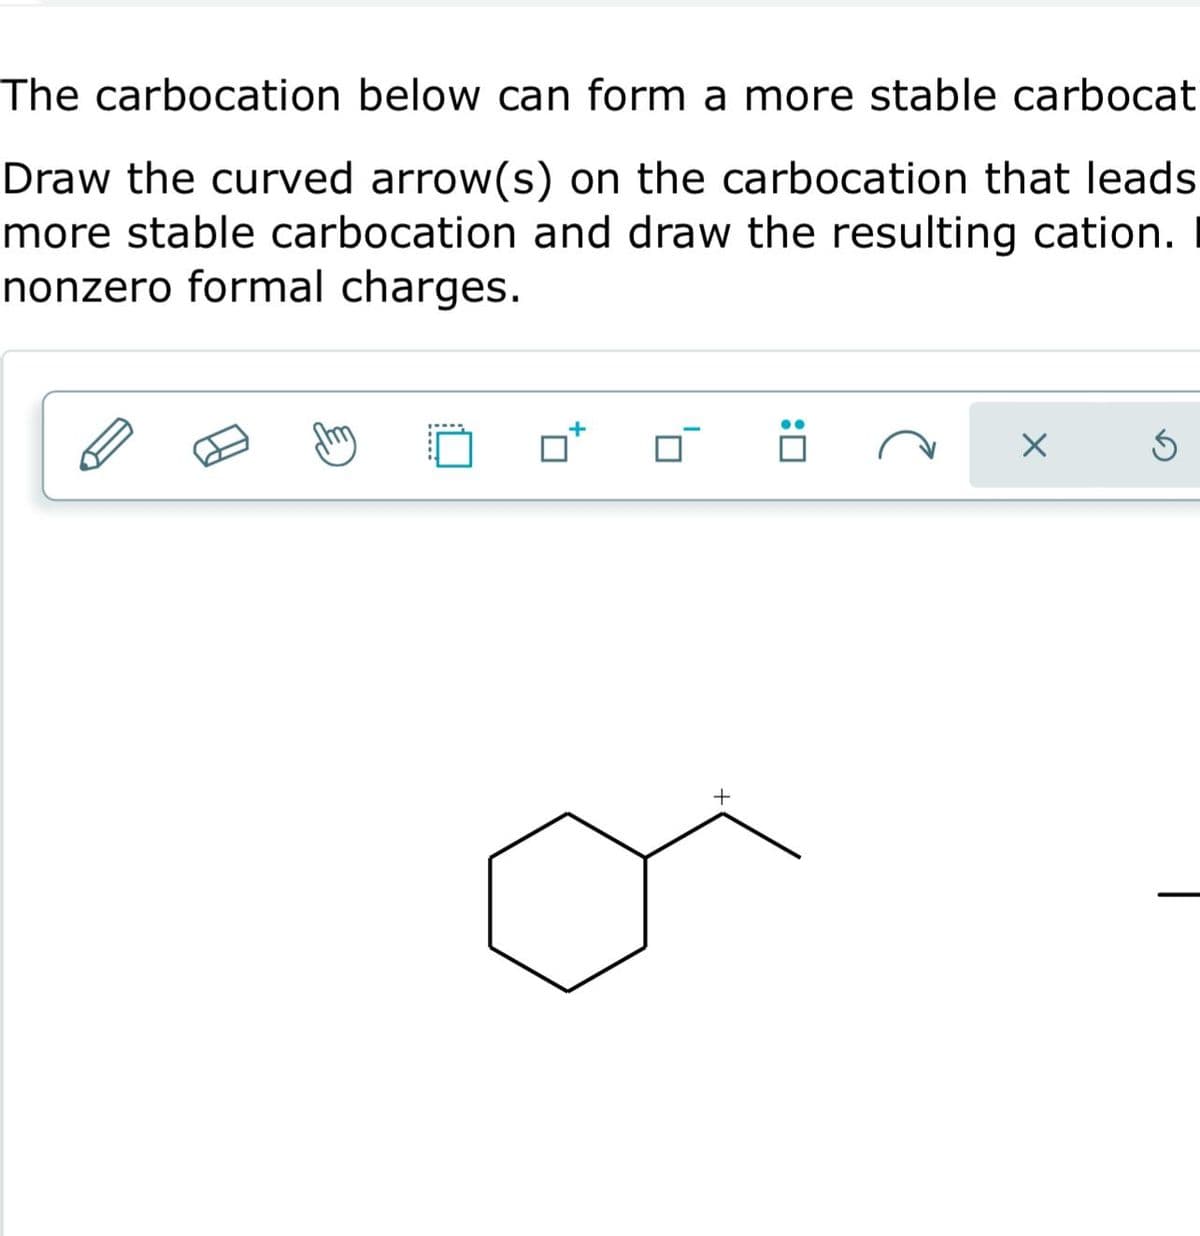 The carbocation below can form a more stable carbocat
Draw the curved arrow(s) on the carbocation that leads
more stable carbocation and draw the resulting cation.
nonzero formal charges.
+
:0
X
5